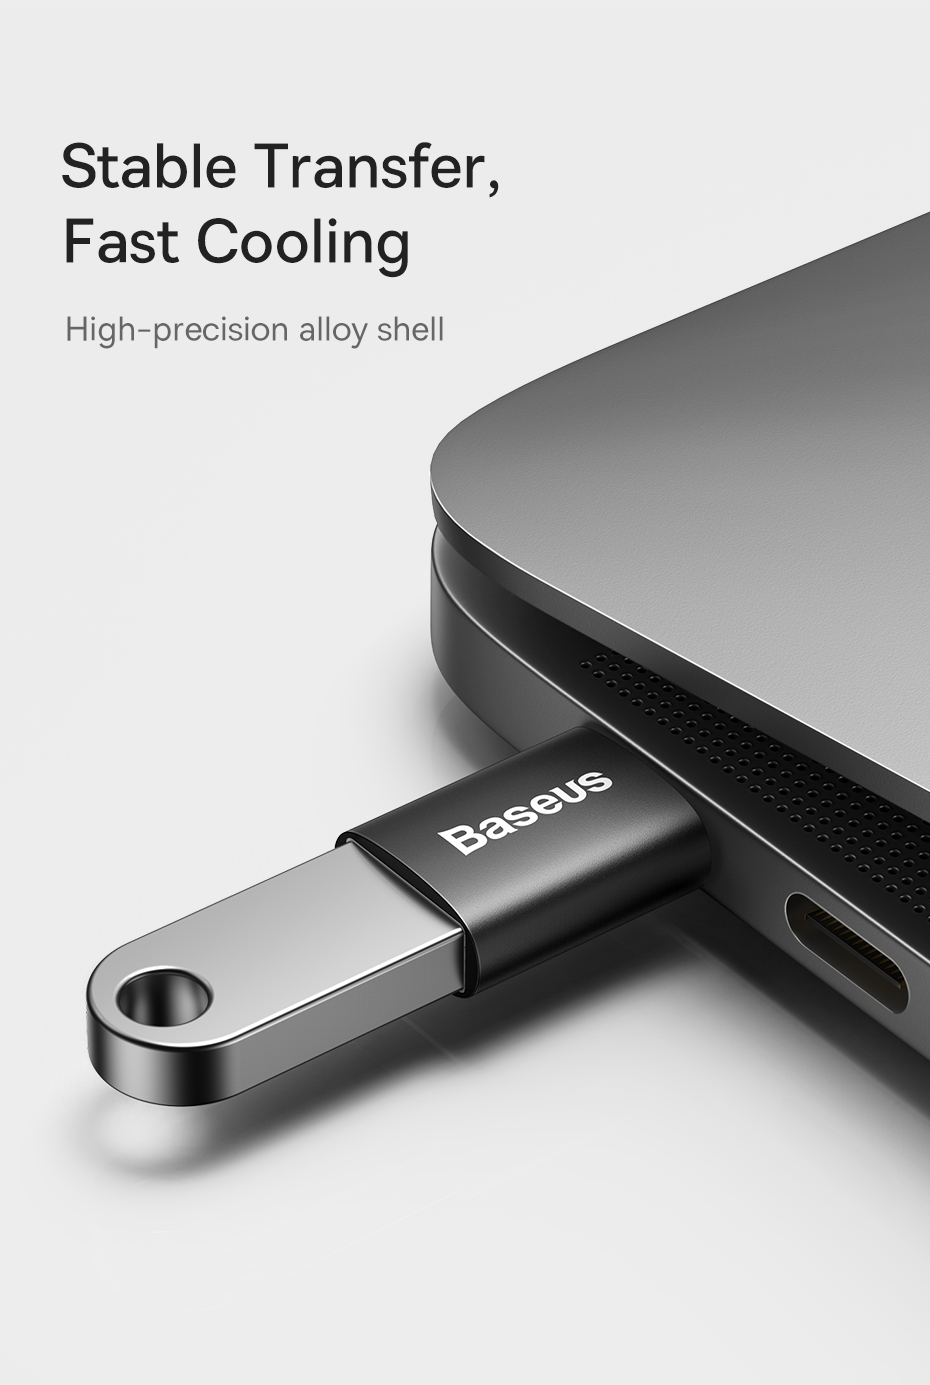 Baseus-USB-C-Male-to-USB31-Female-Adapter-10Gbps-Speed-Transfer-Connector-For-XIAOMI-Mi12-For-Samsun-1930180-10